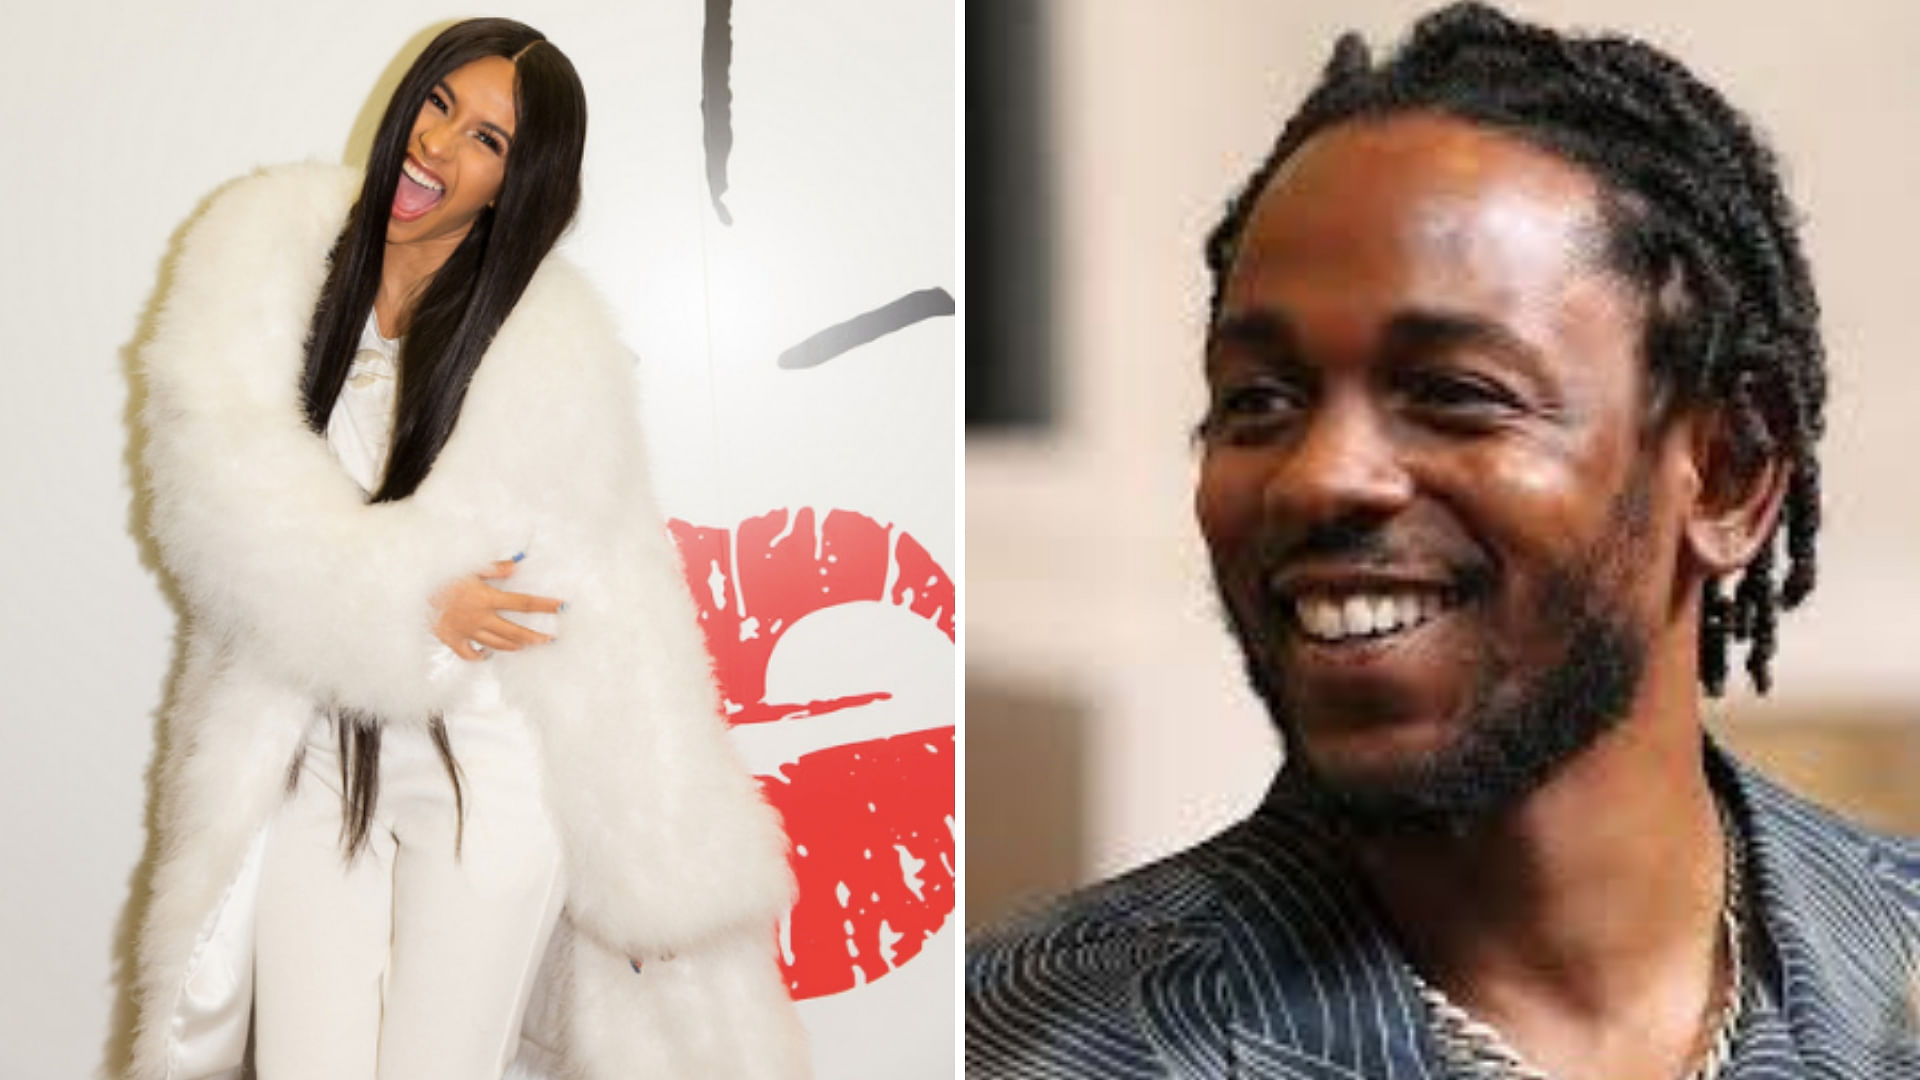 Cardi B and Kendrick Lamar leading in the list with maximum nominations.